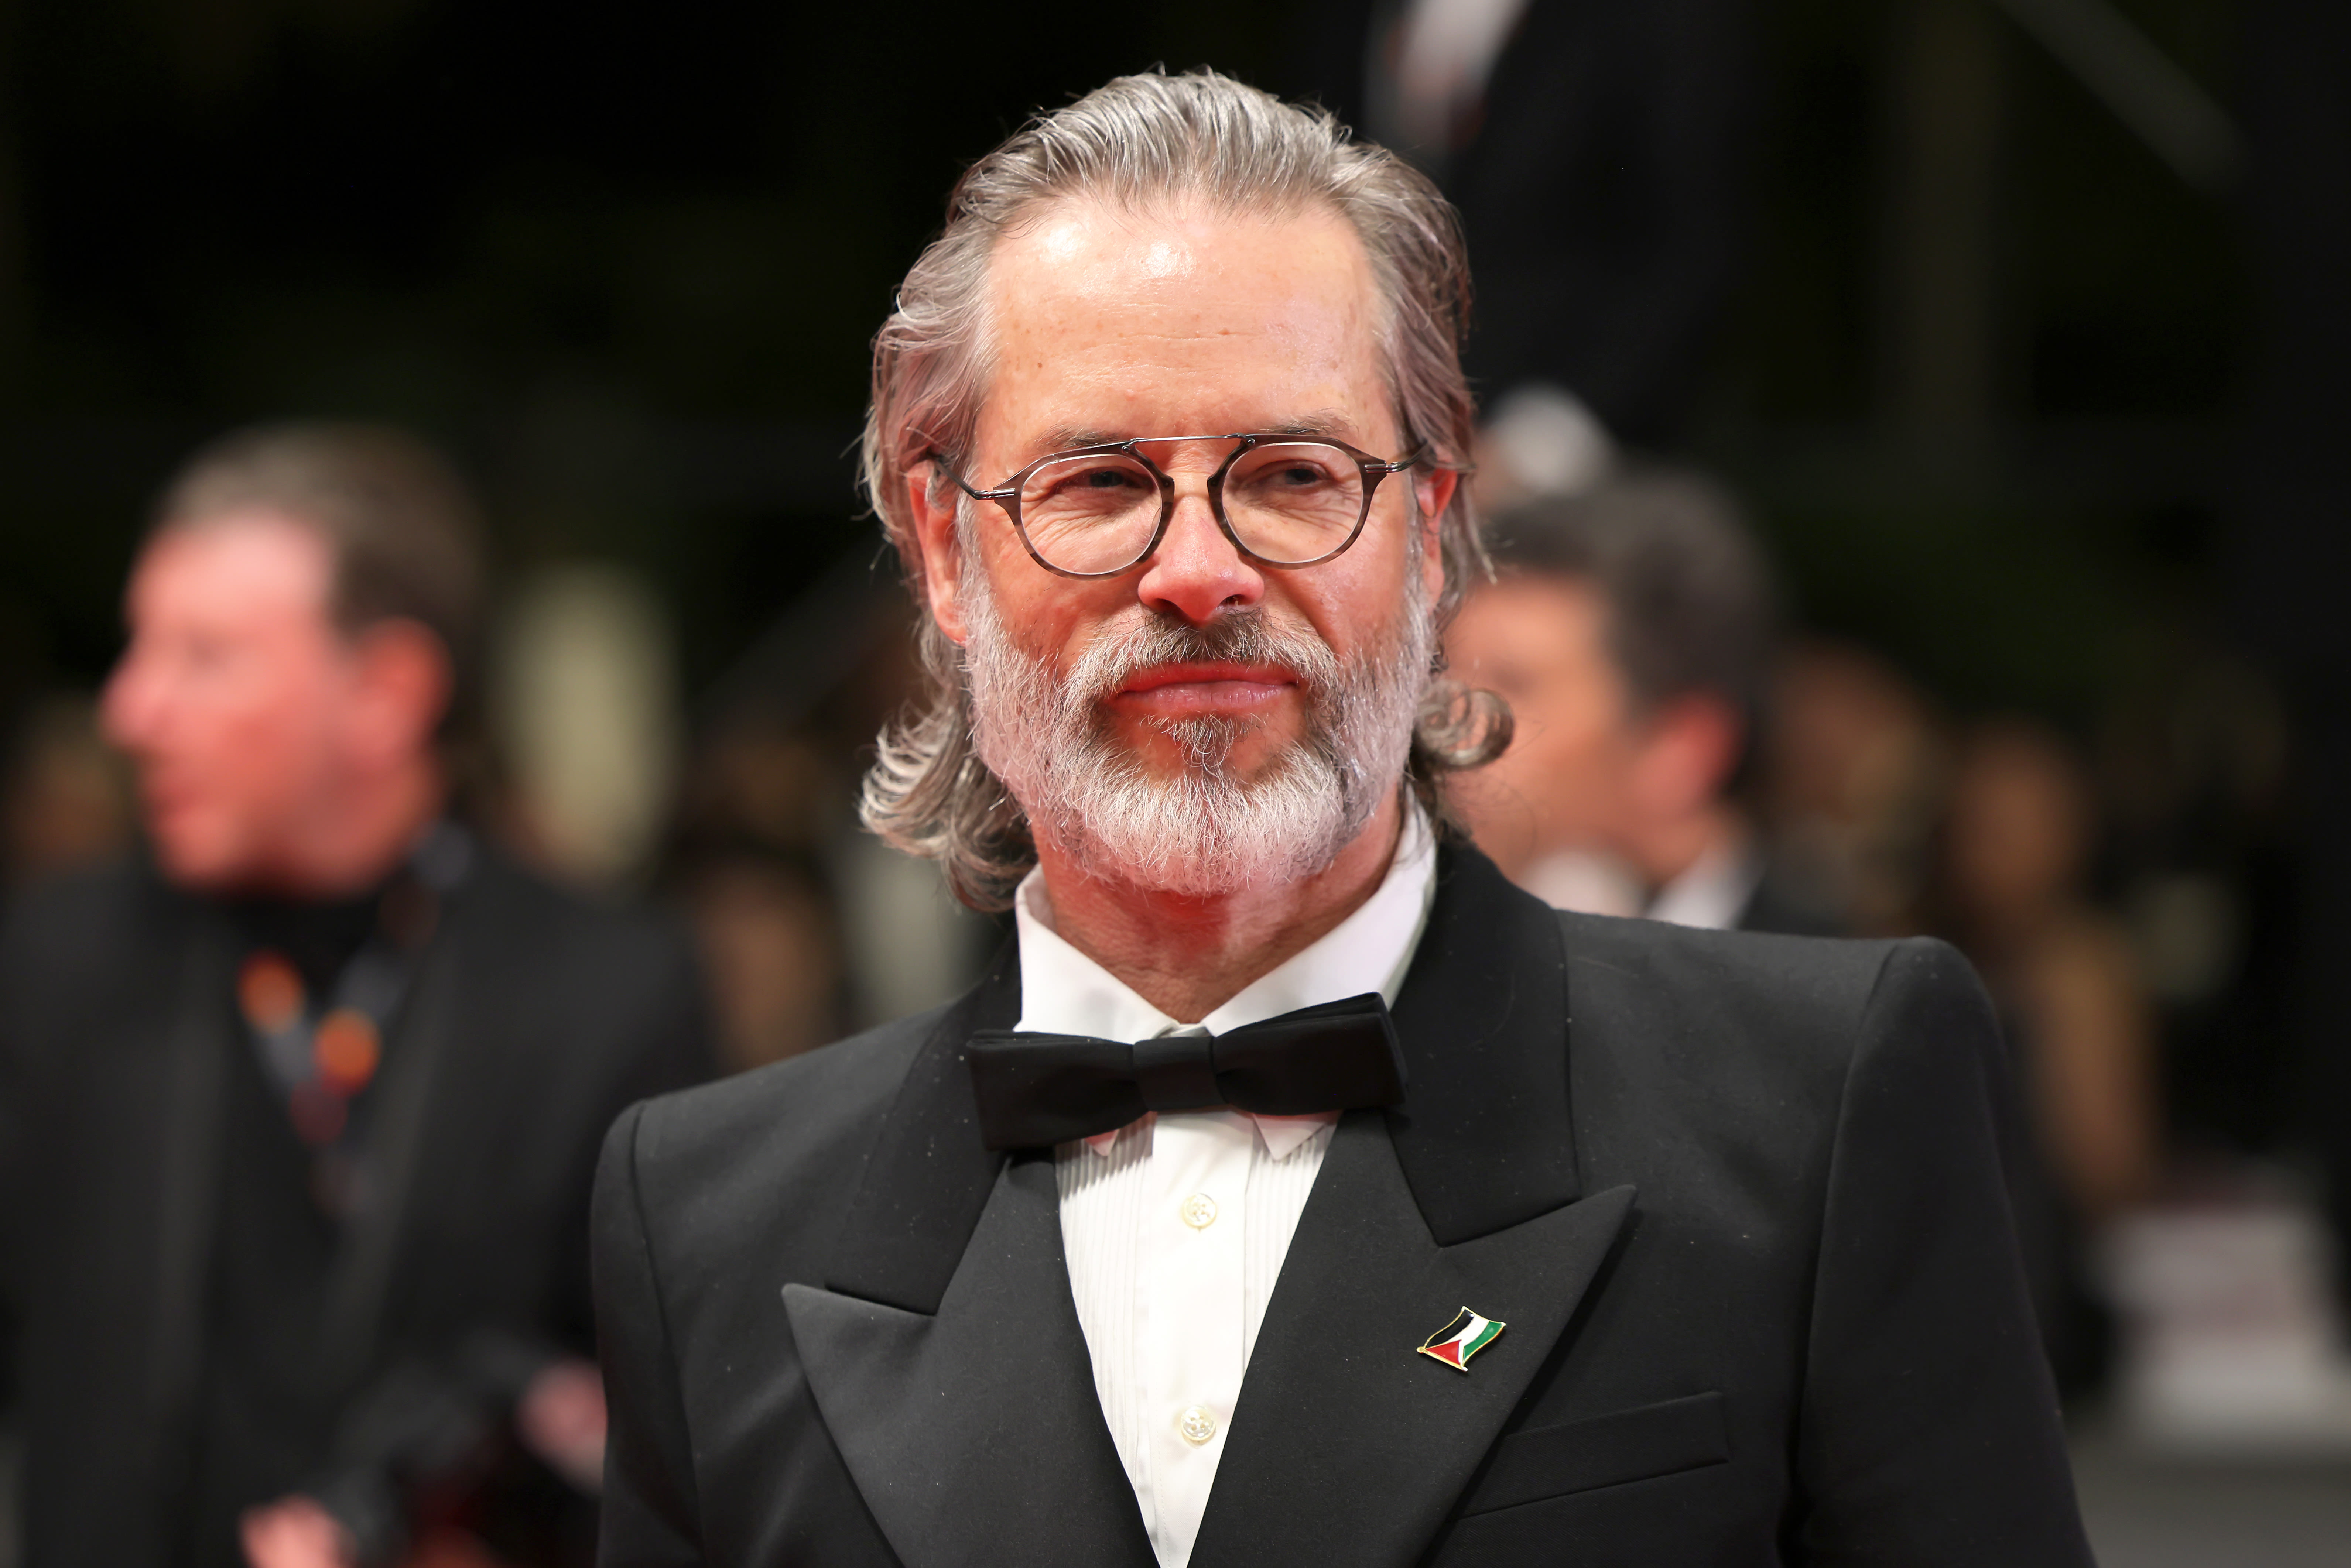 Vanity Fair France Apologizes After Guy Pearce’s Palestinian Flag Pin Edited Out of Cannes Portrait...